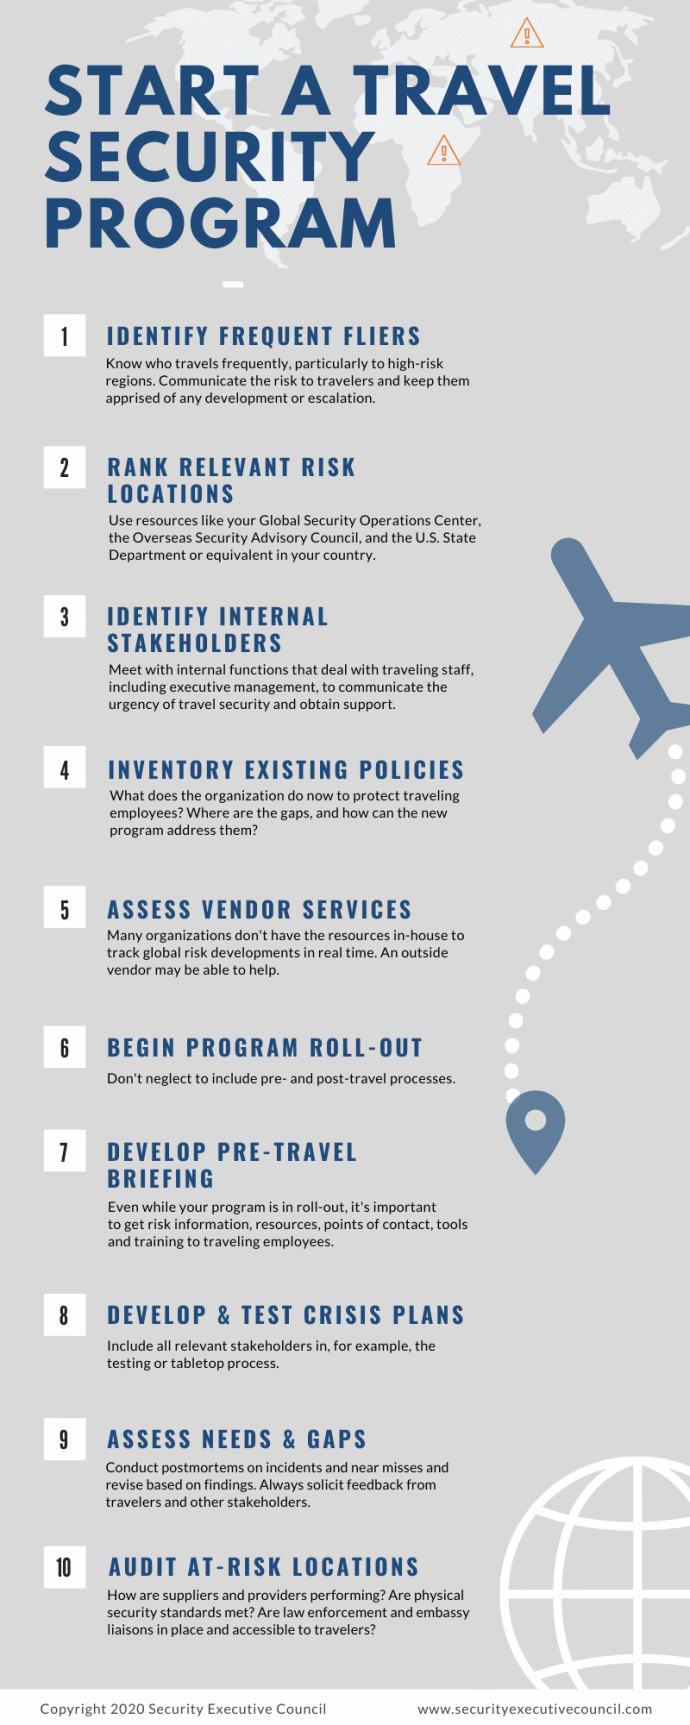 Infographic showing ten actions that should be considered when starting a travel security plan. This includes 1. Identify frequent flyers. 2) Rank relevant risk. 3) Identify internal stakeholders. 4) inventory existing policies. 5) assess vendor services. 6) Begin program roll-out. 7) Develop pre-travel briefing. 8) Develop and test crisis plans. 9) Assess needs and gaps. 10) Audit at-risk locations.